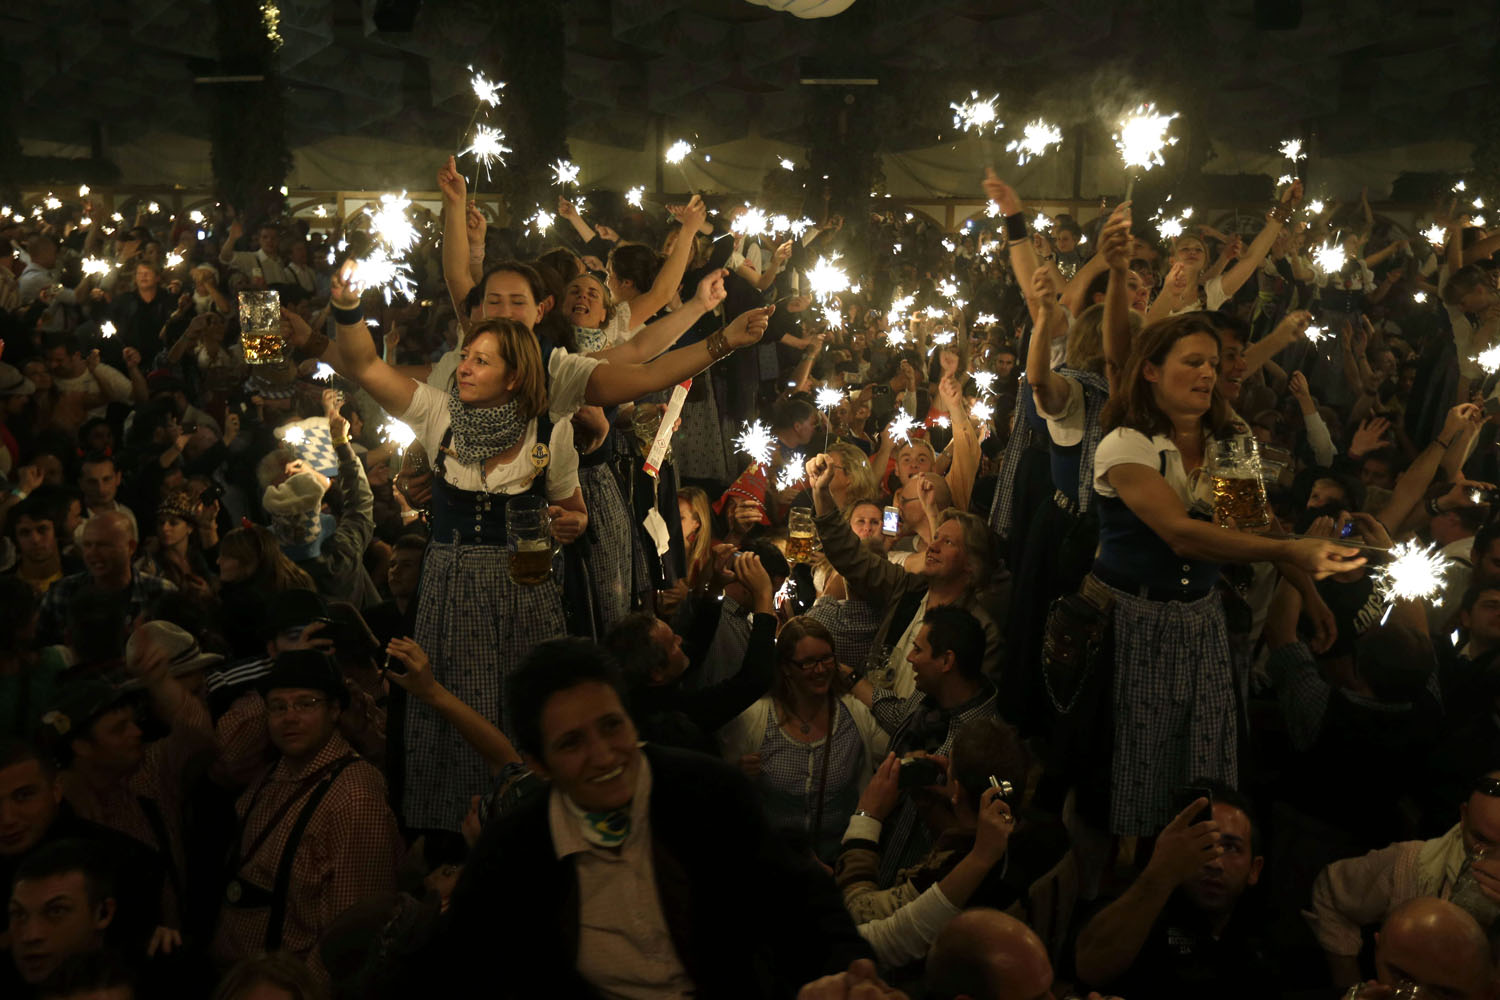 Oct. 7, 2012. Waitresses dance on tables in a beer tent on the final evening of the famous Bavarian  Oktoberfest  beer festival in Munich, southern Germany.